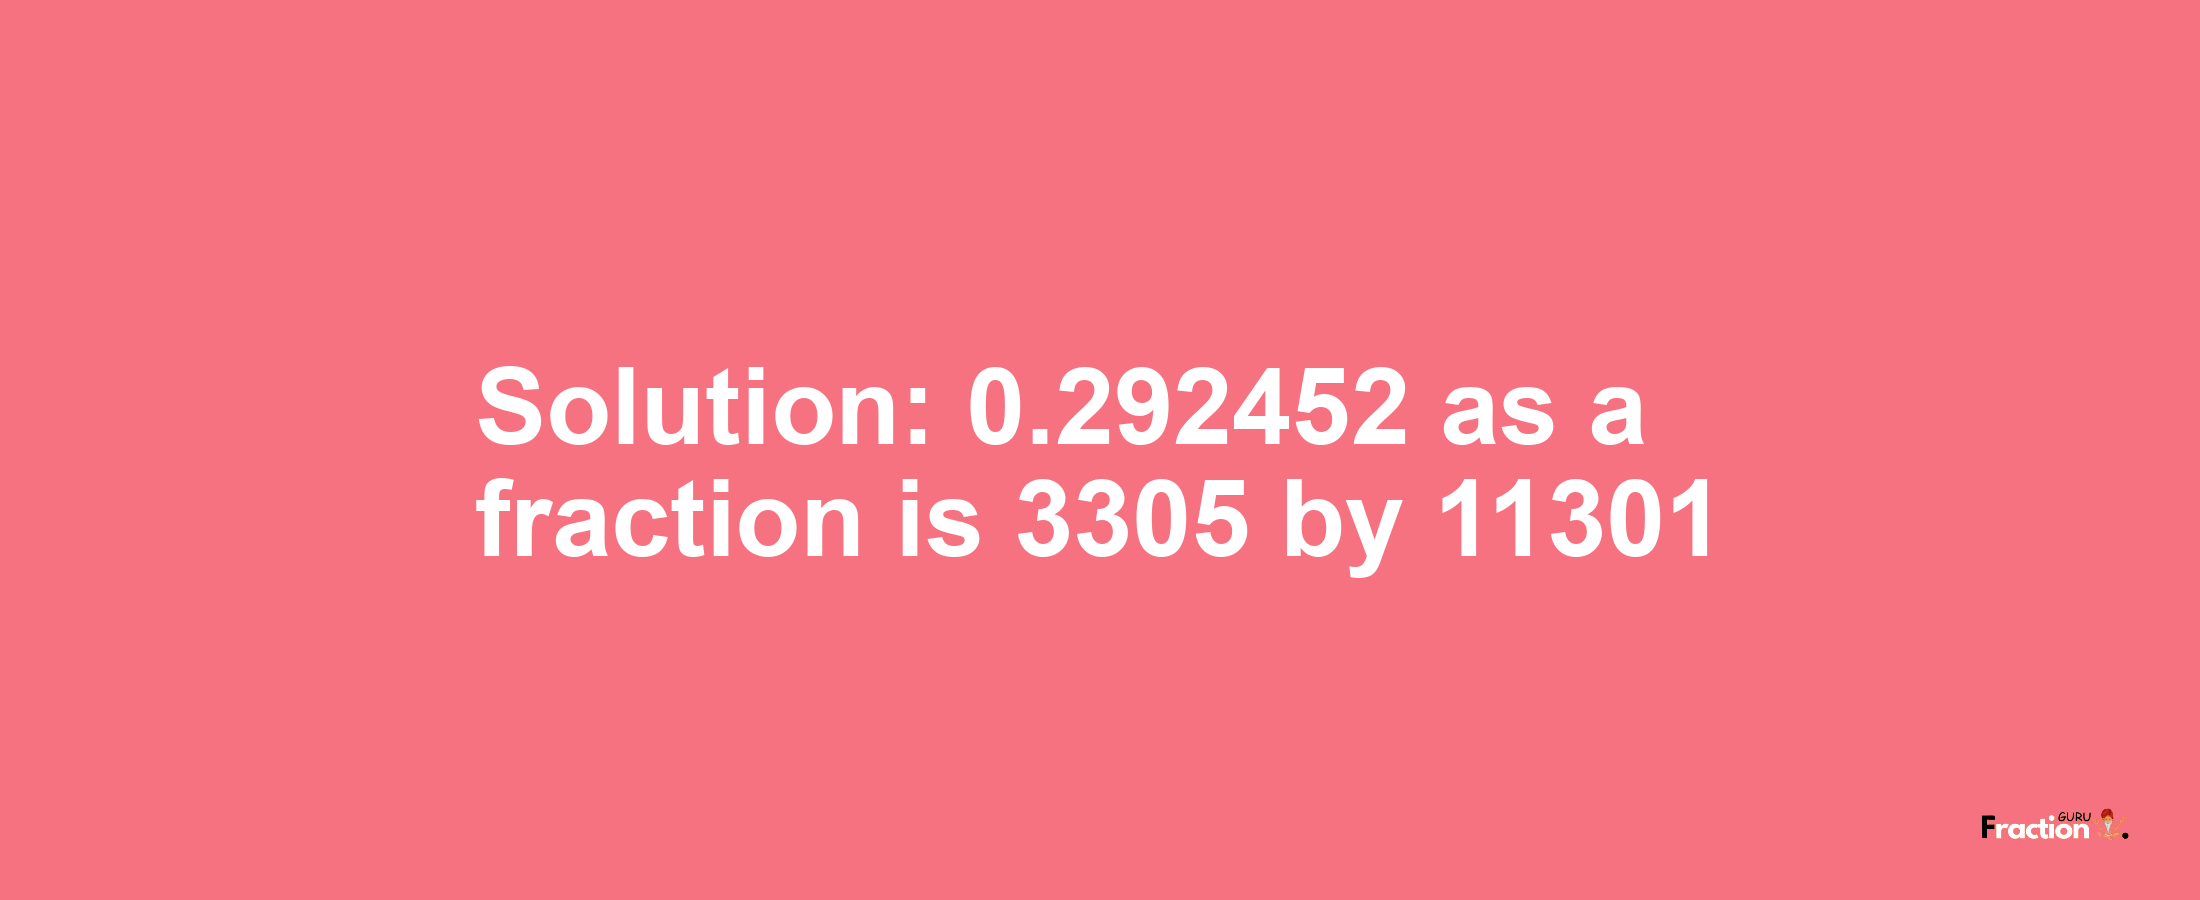 Solution:0.292452 as a fraction is 3305/11301